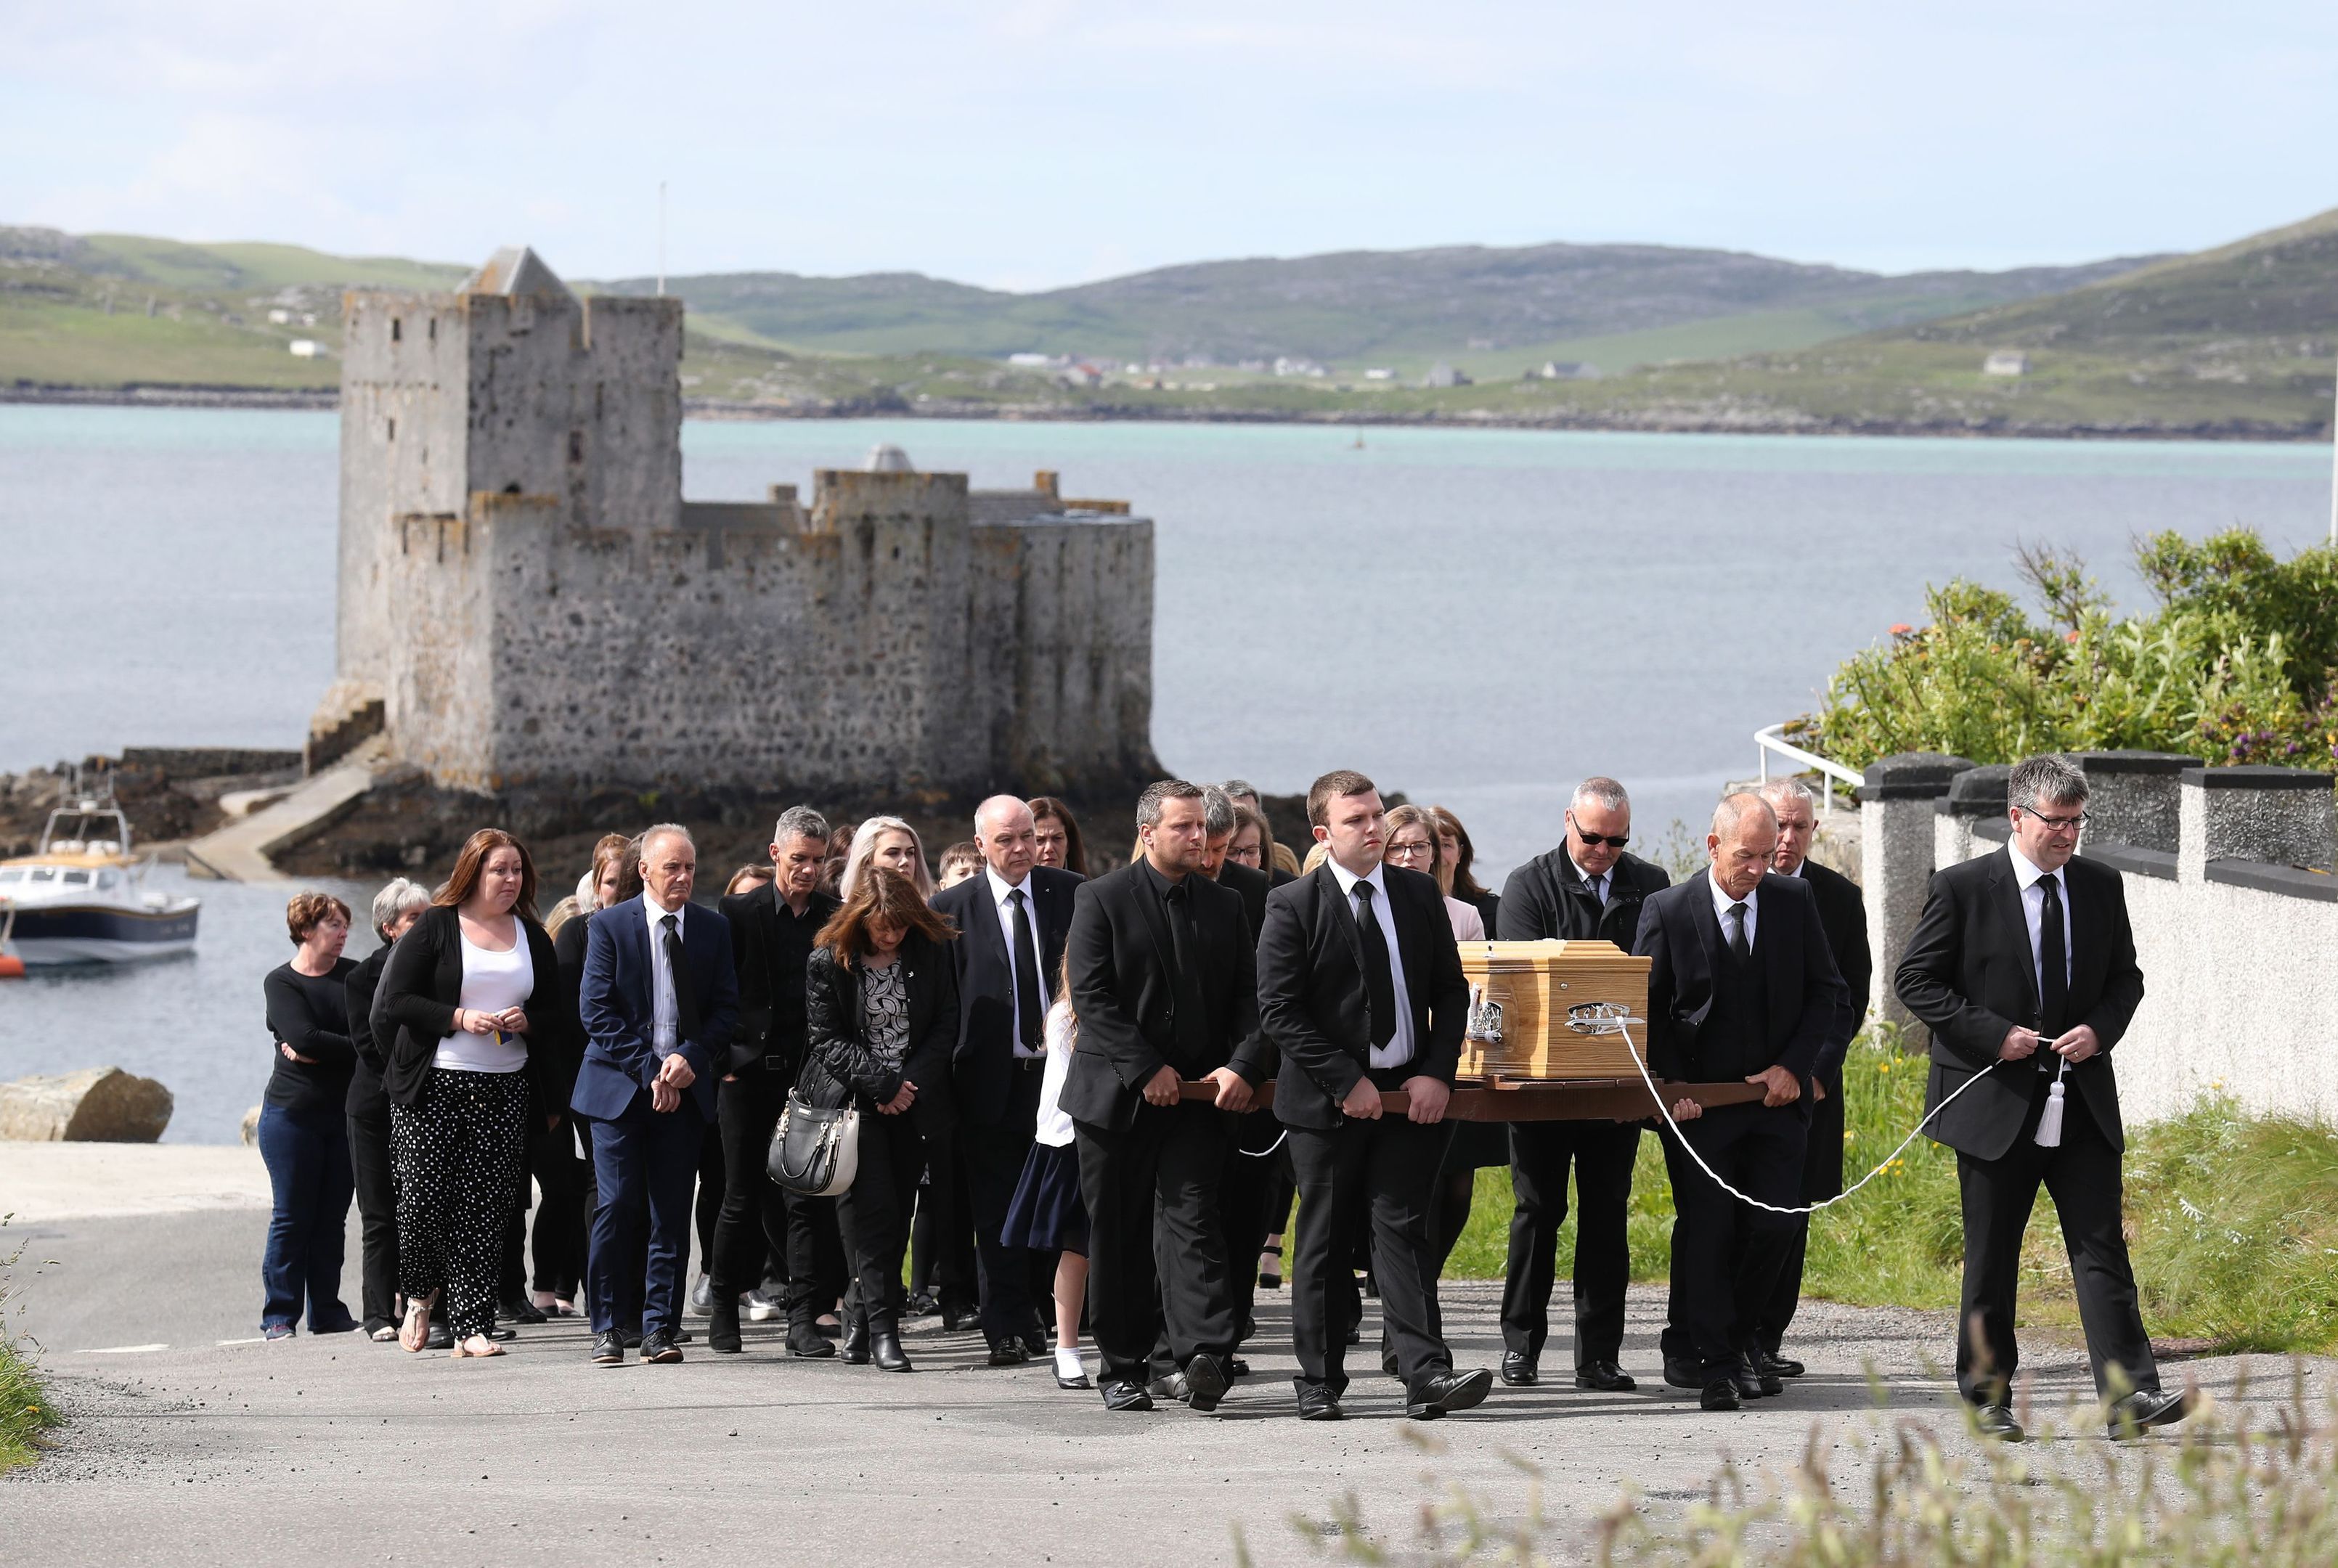 Funeral procession passes Kisimul Castle on its way to the Church of Our Lady, Star of the Sea, in Castlebay.